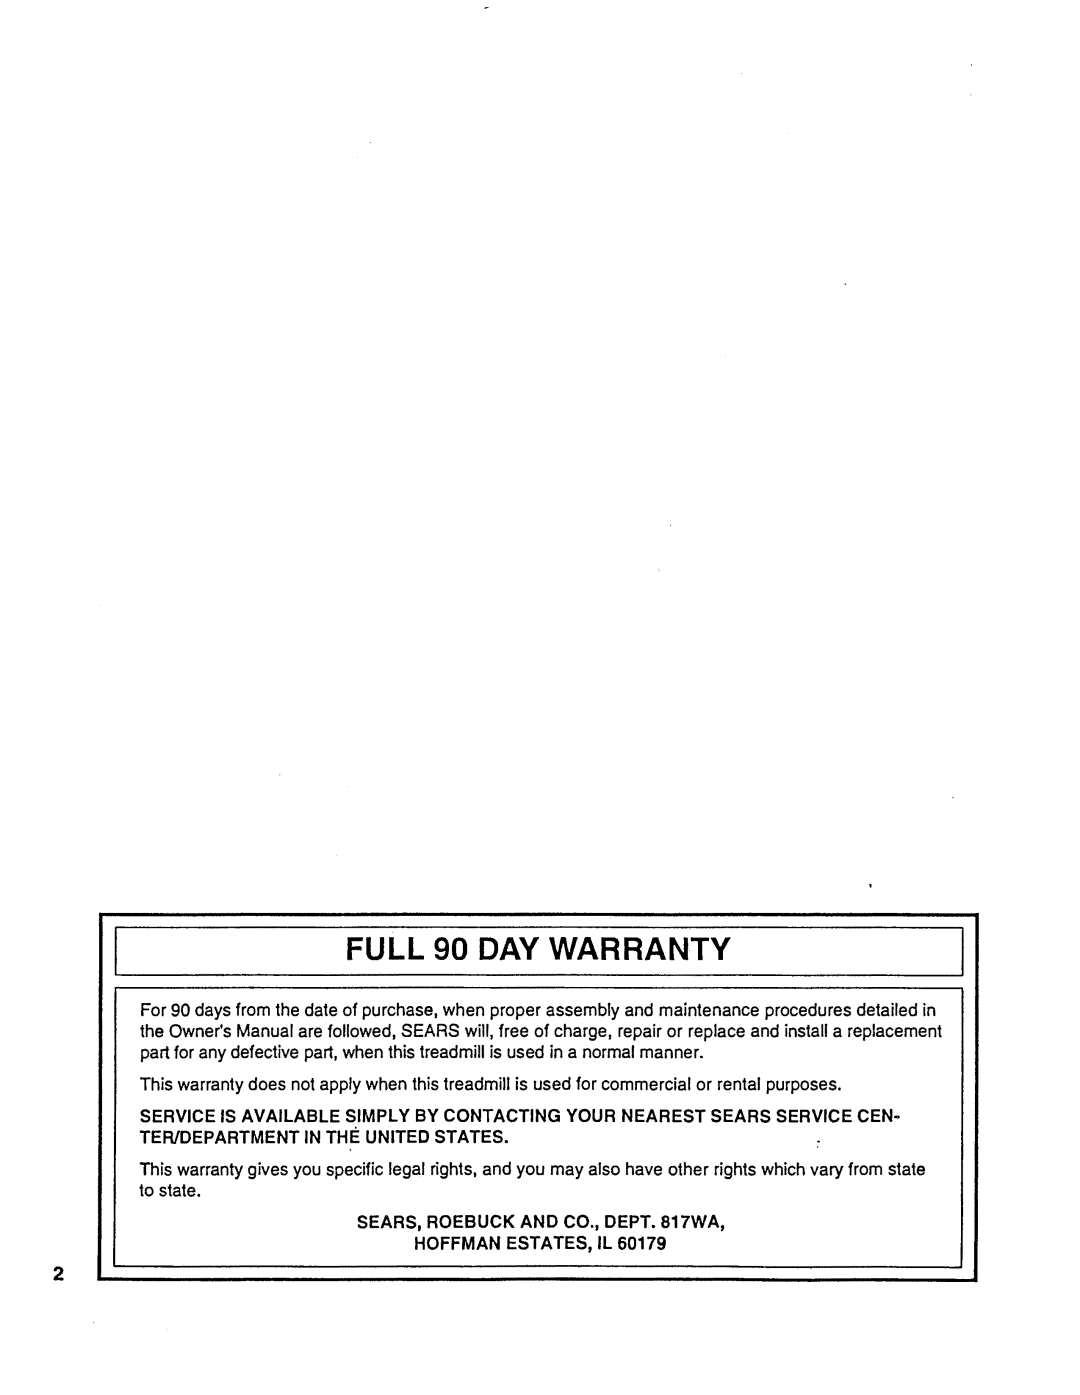 Sears 831.297451 owner manual FULL 90 DAY WARRANTY, SEARS, ROEBUCK AND CO., DEPT. 817WA HOFFMAN ESTATES, IL 